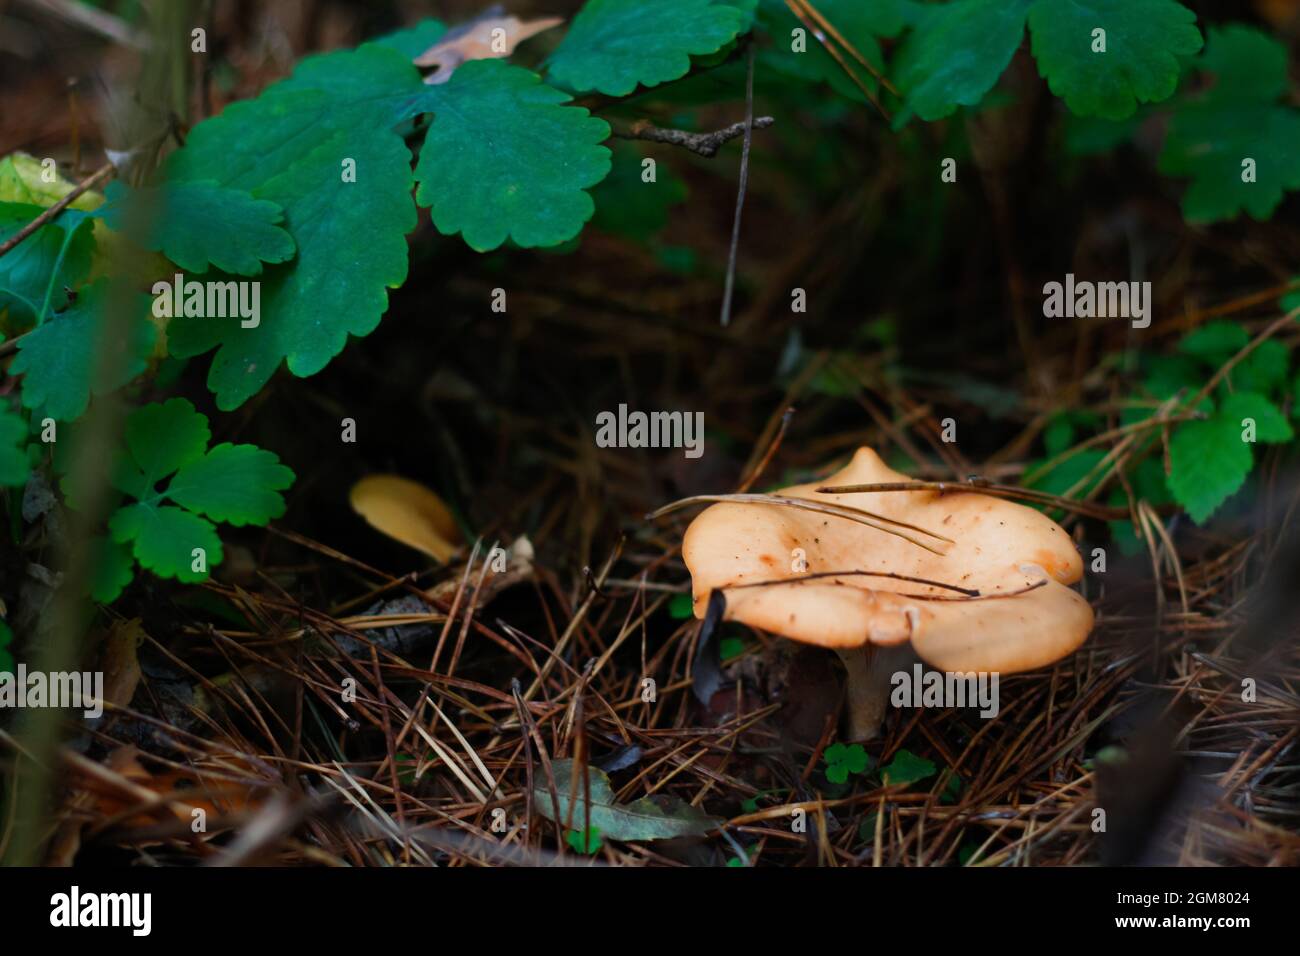 Defocus yellow russula mushroom among dry grass, leaves and needles. Edible mushroom growing in the green forest. Boletus hiding in ground. Side view. Stock Photo